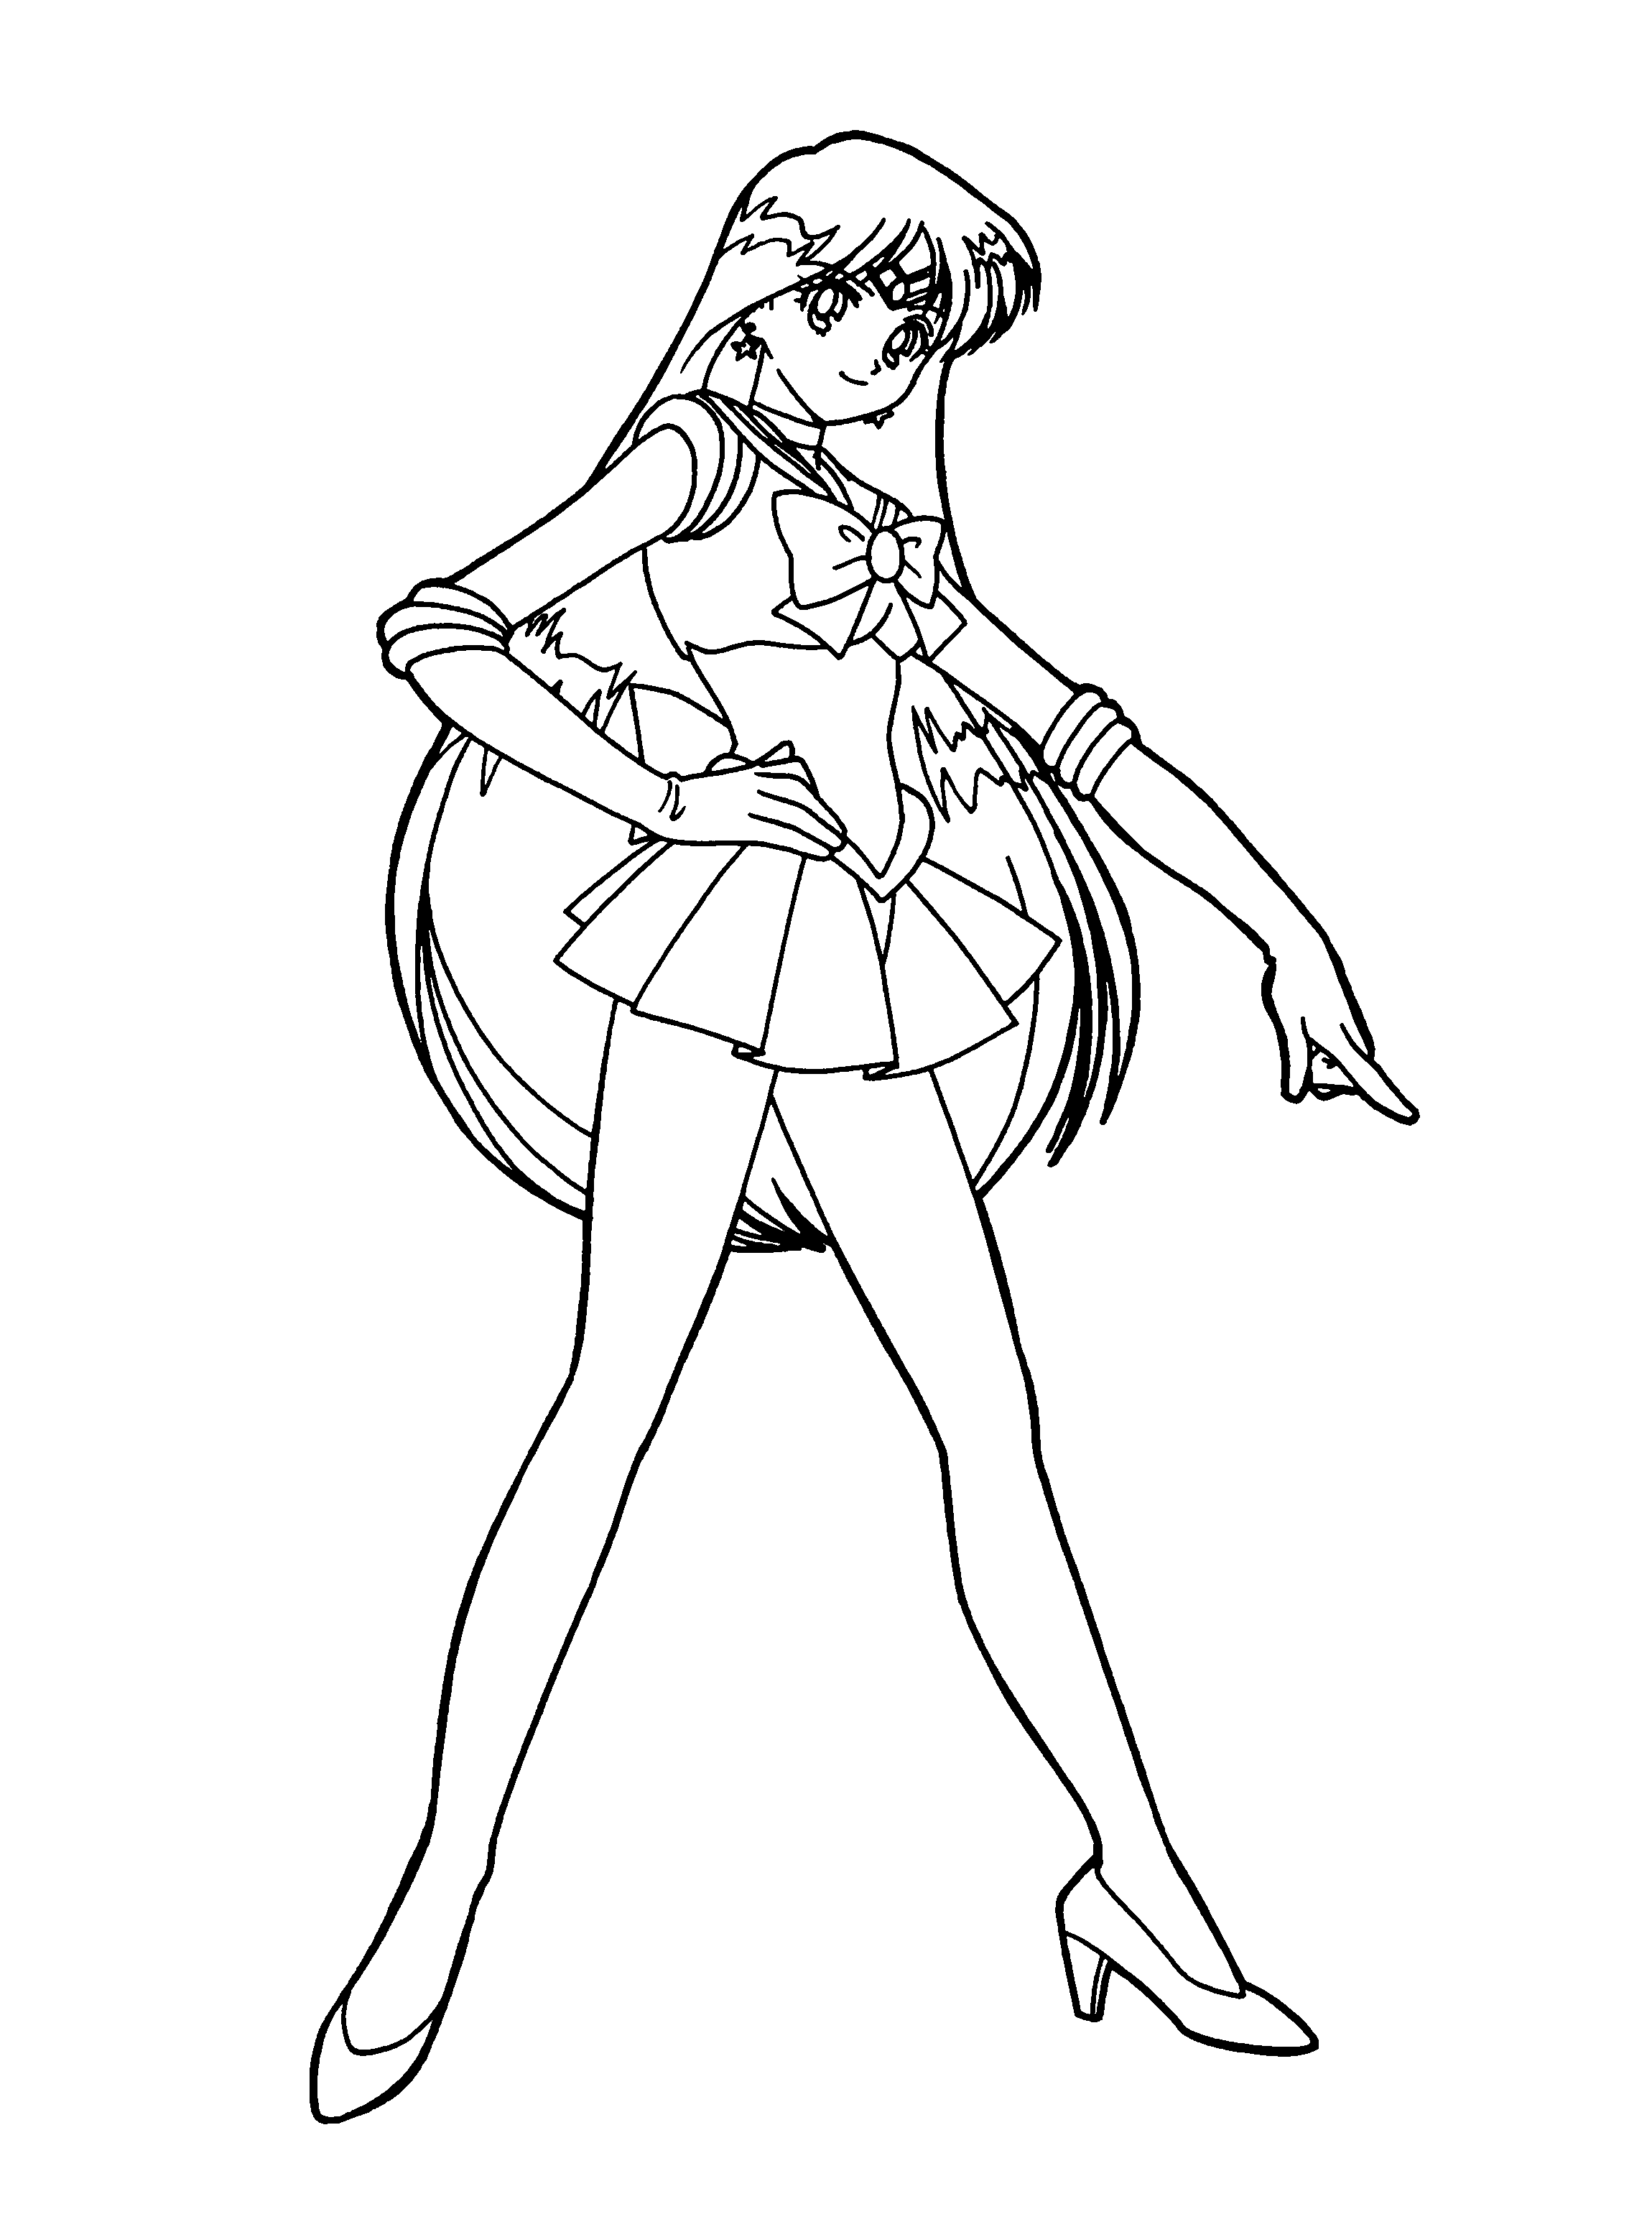 coloring sailor moon sailor moon coloring pages pose kiddypicts sailor coloring moon 